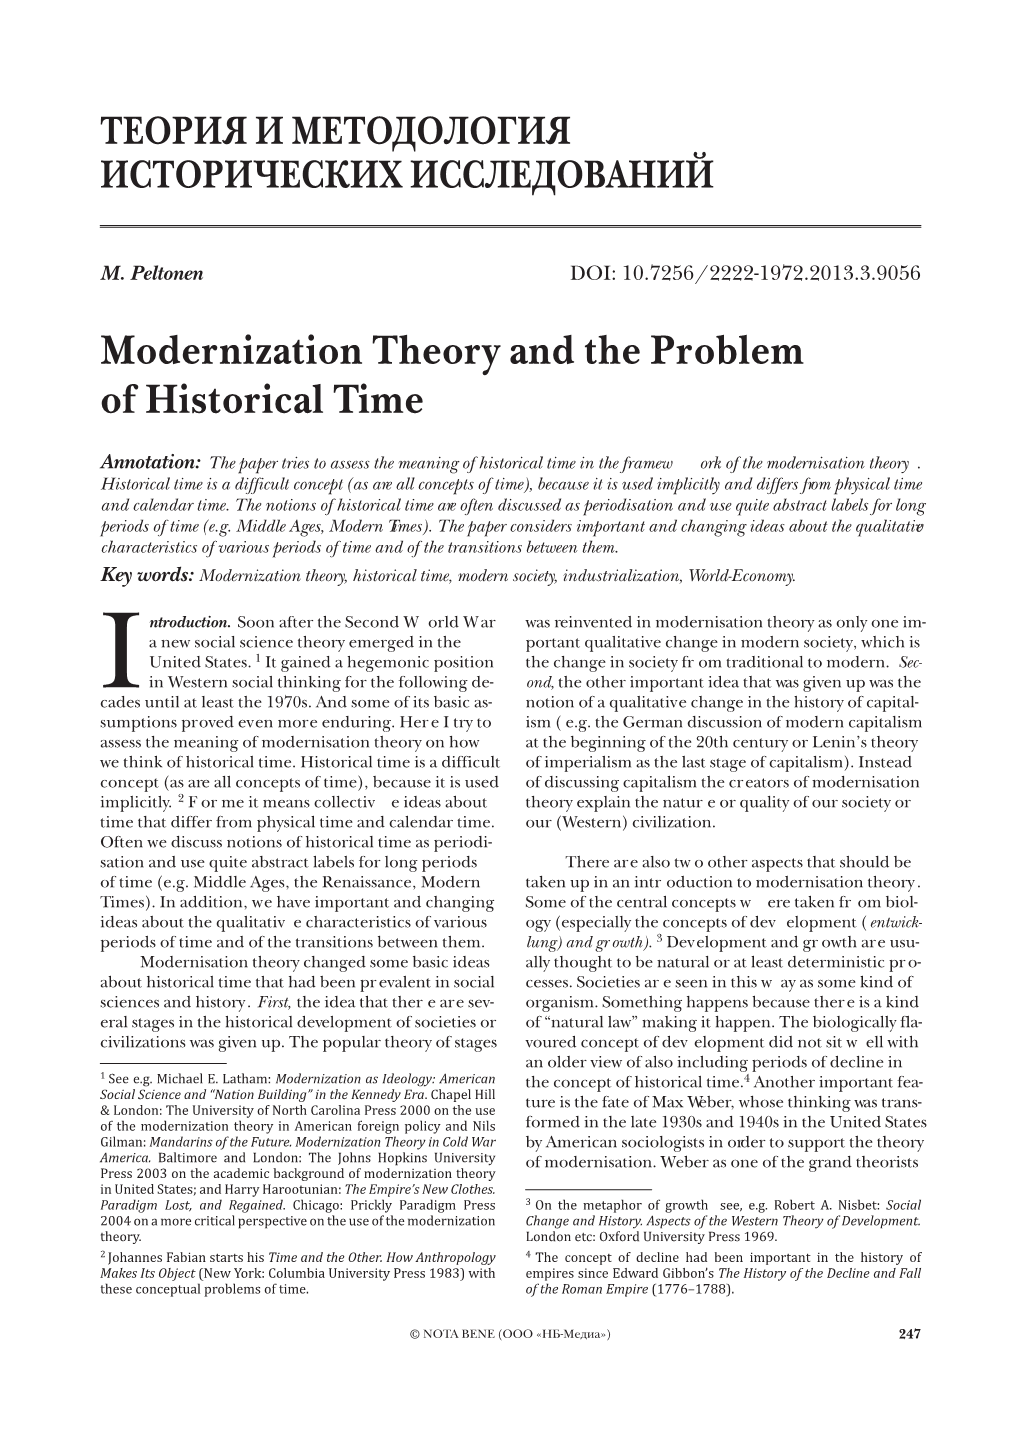 Modernization Theory and the Problem of Historical Time